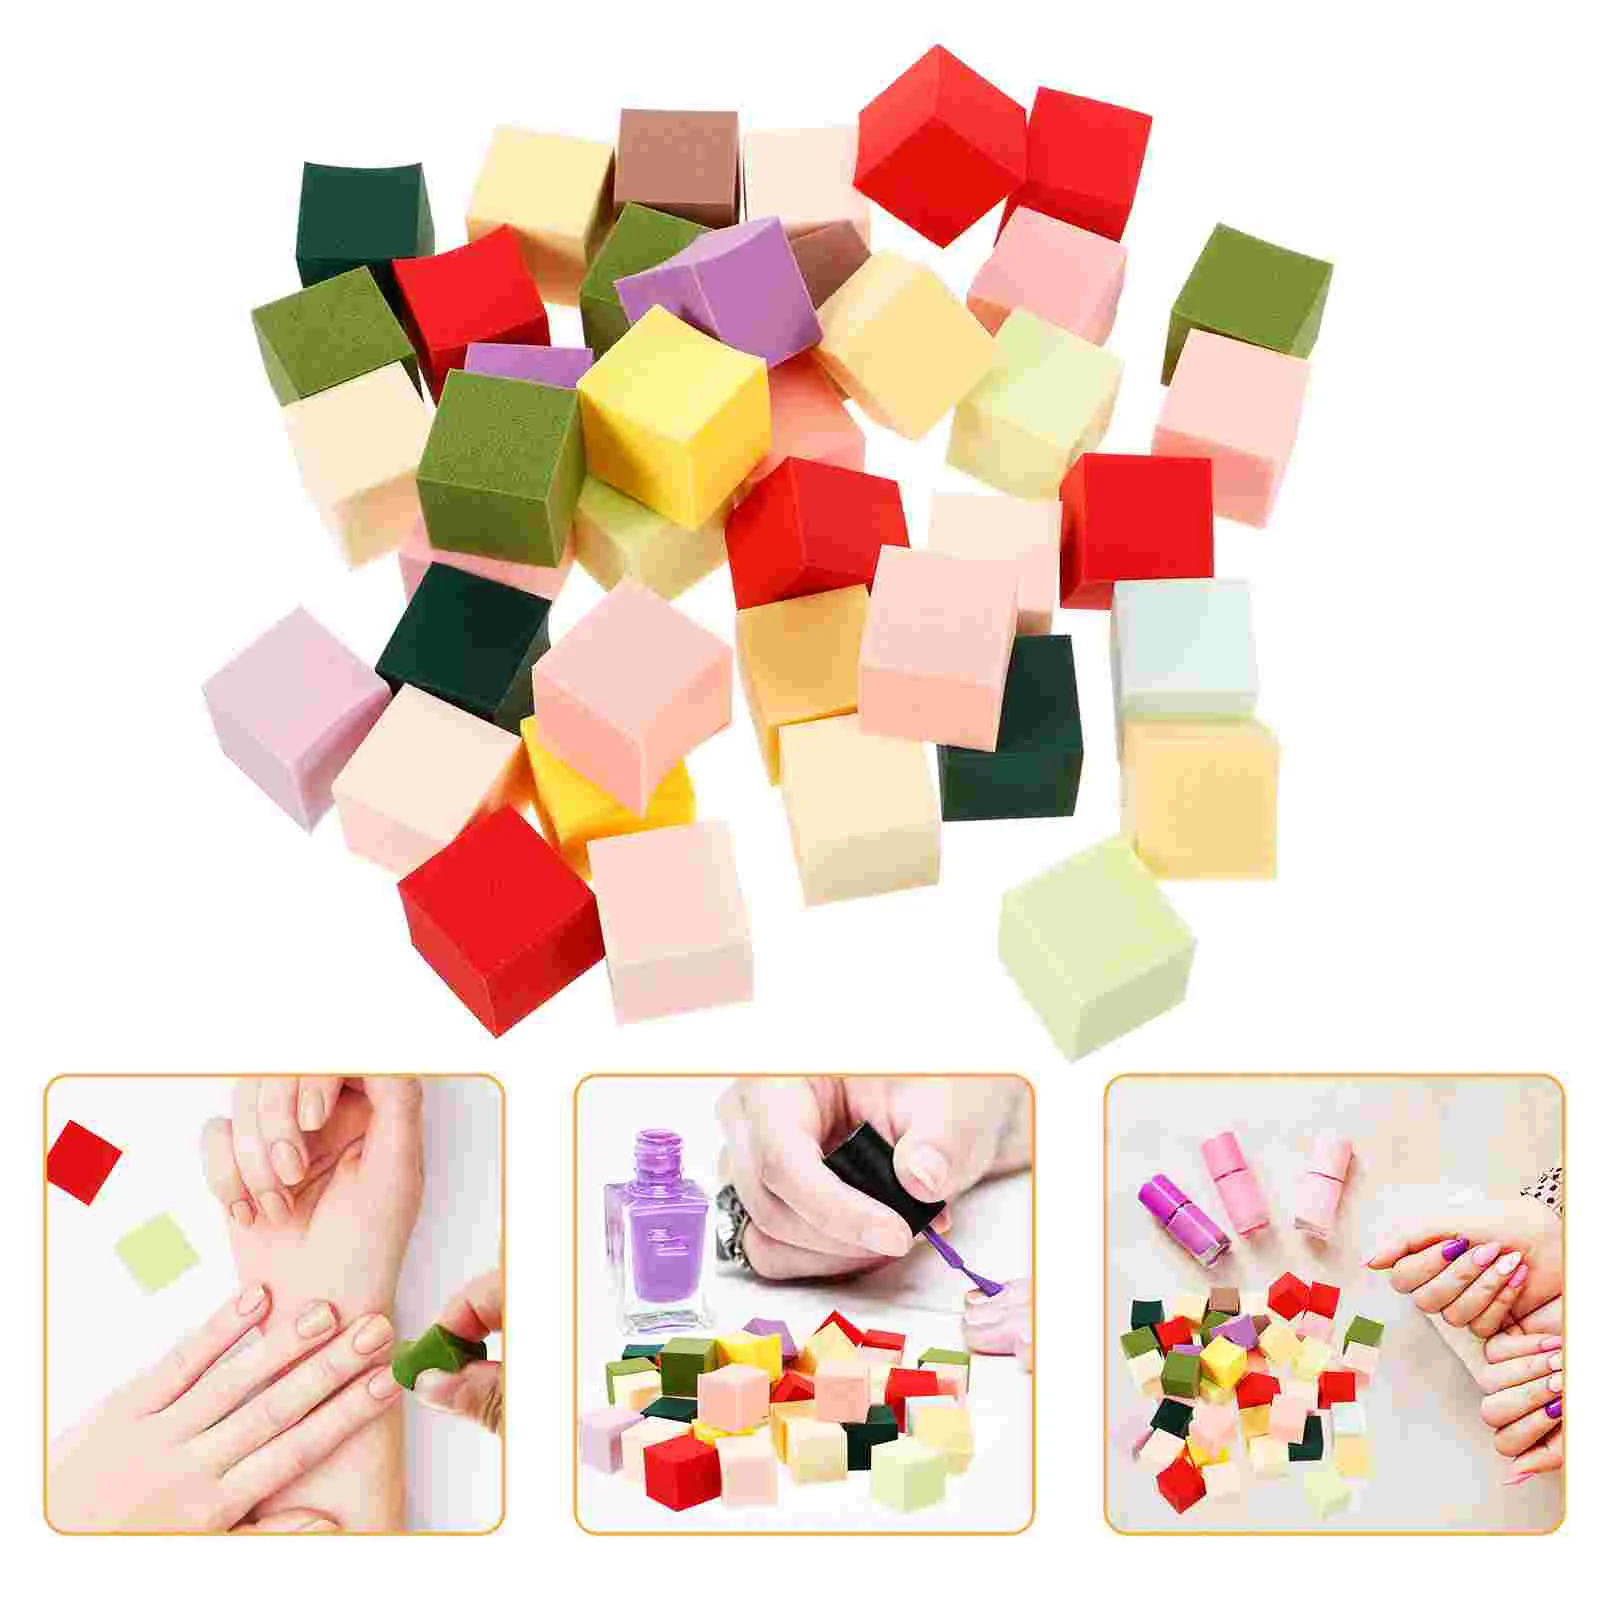 

50 Pcs Manicure Tools Nail Sponge Puff Makeup Powder French Tip Picking Sponges Small